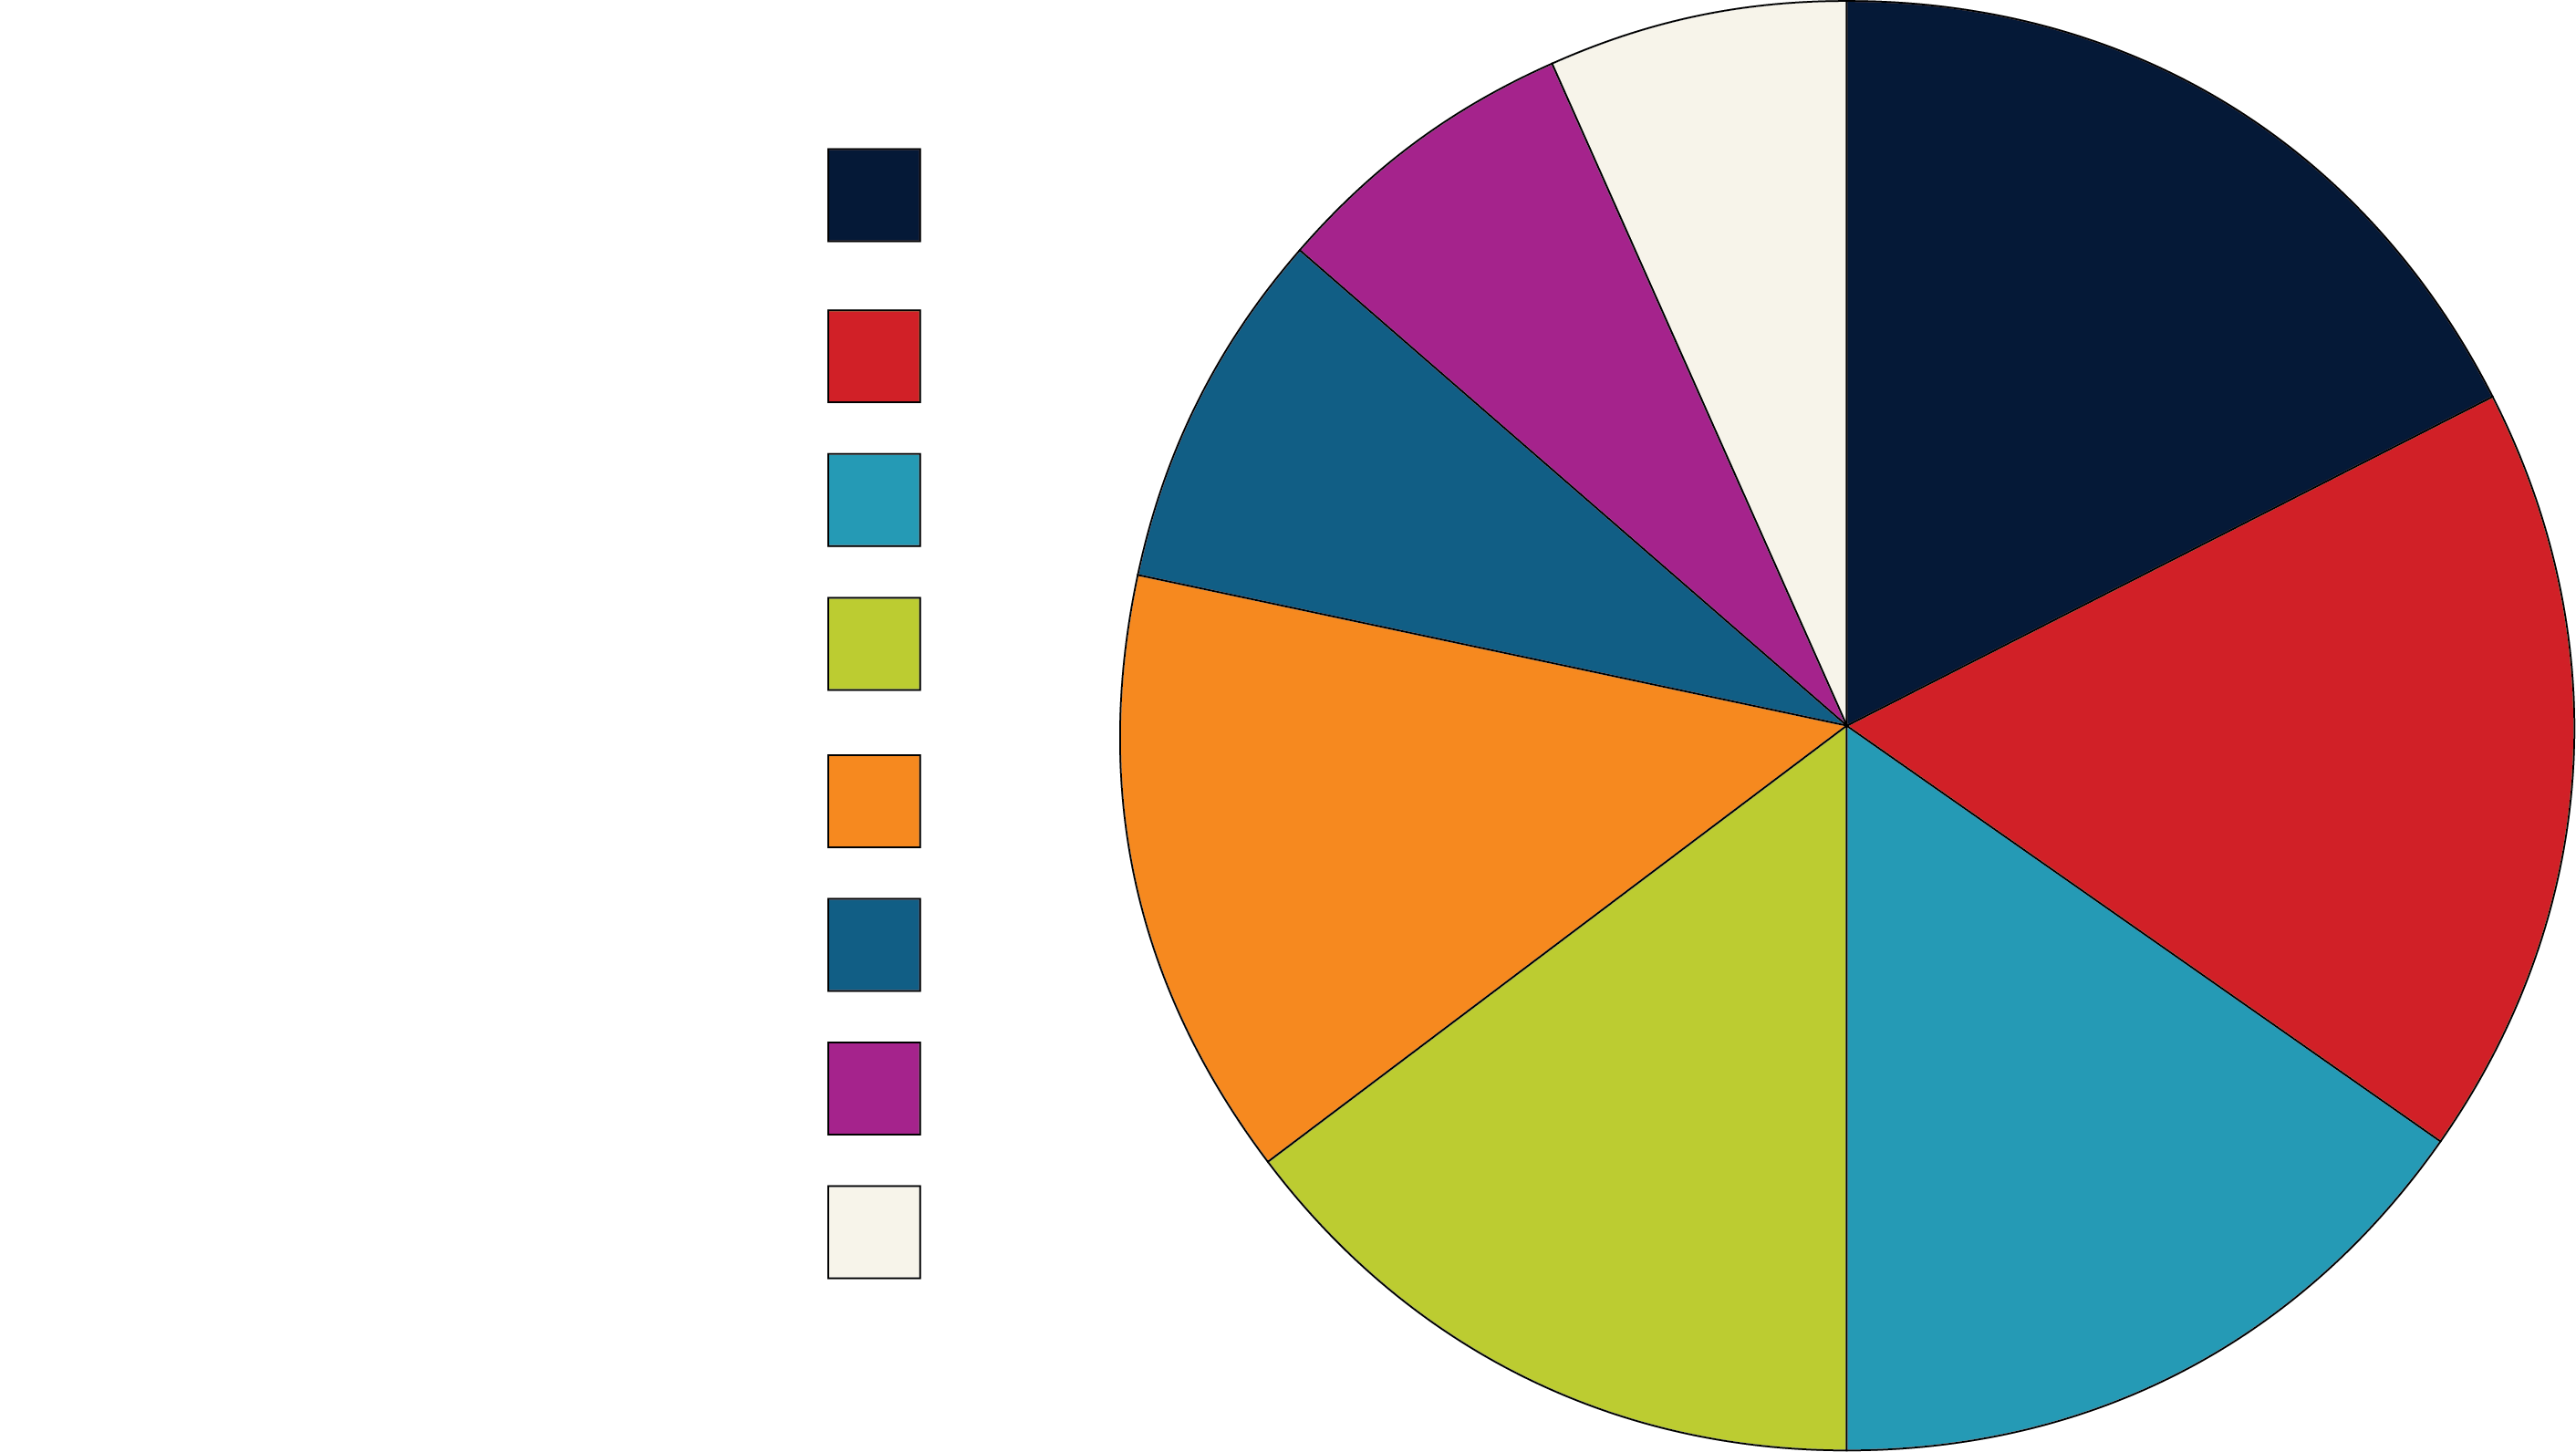 Pie chart of industry representation